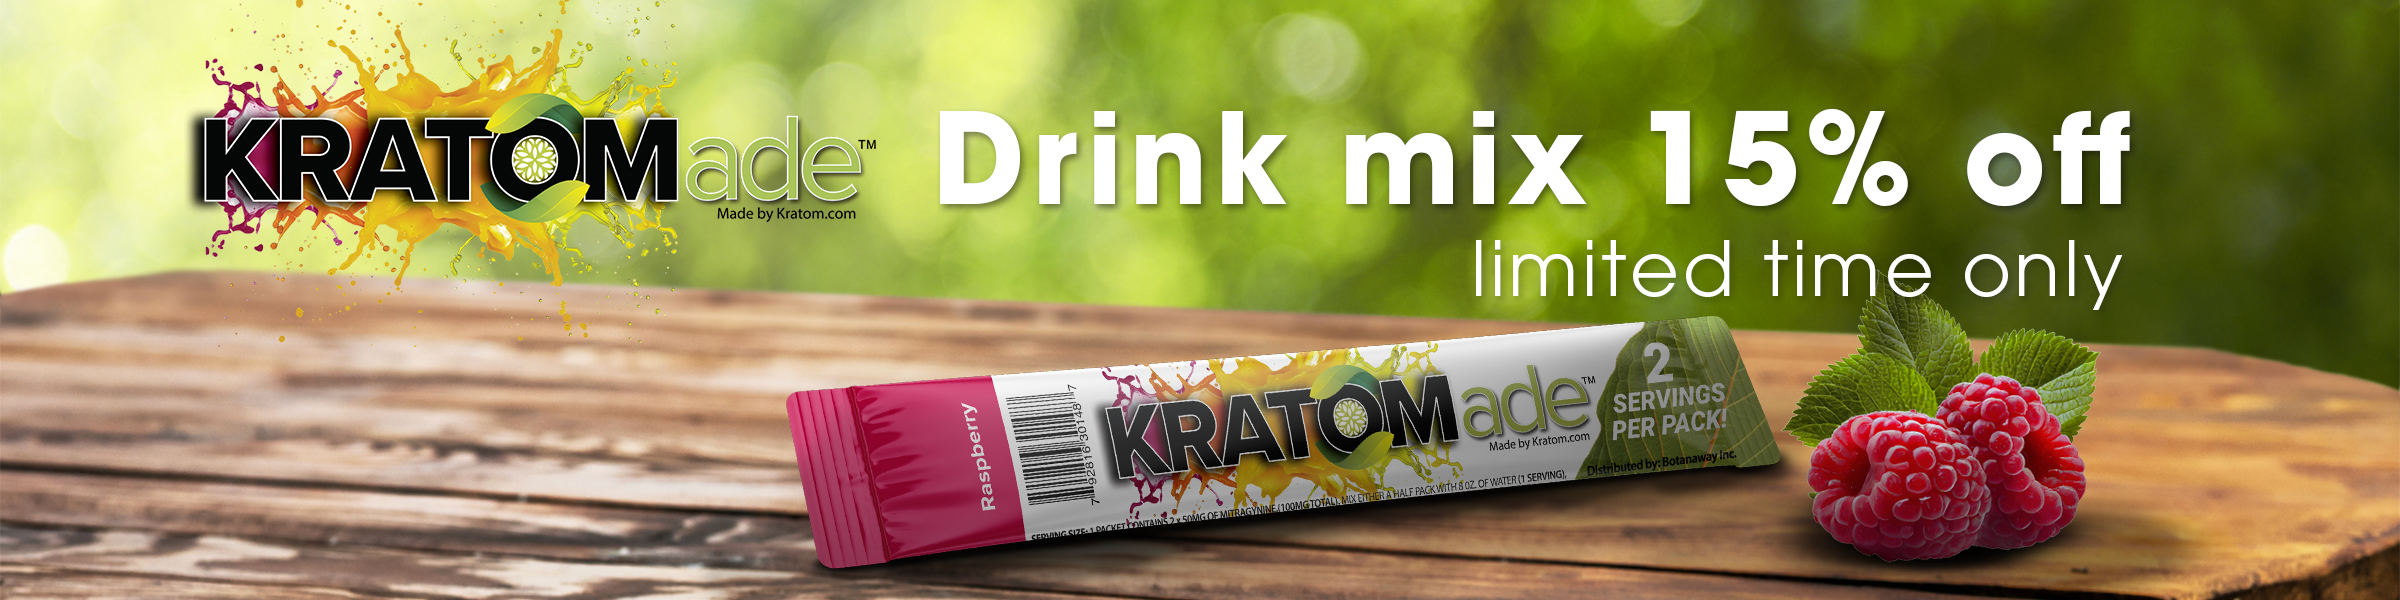 KRATOMade Drink Mix 15% off with flavorful15 coupon code limited offer